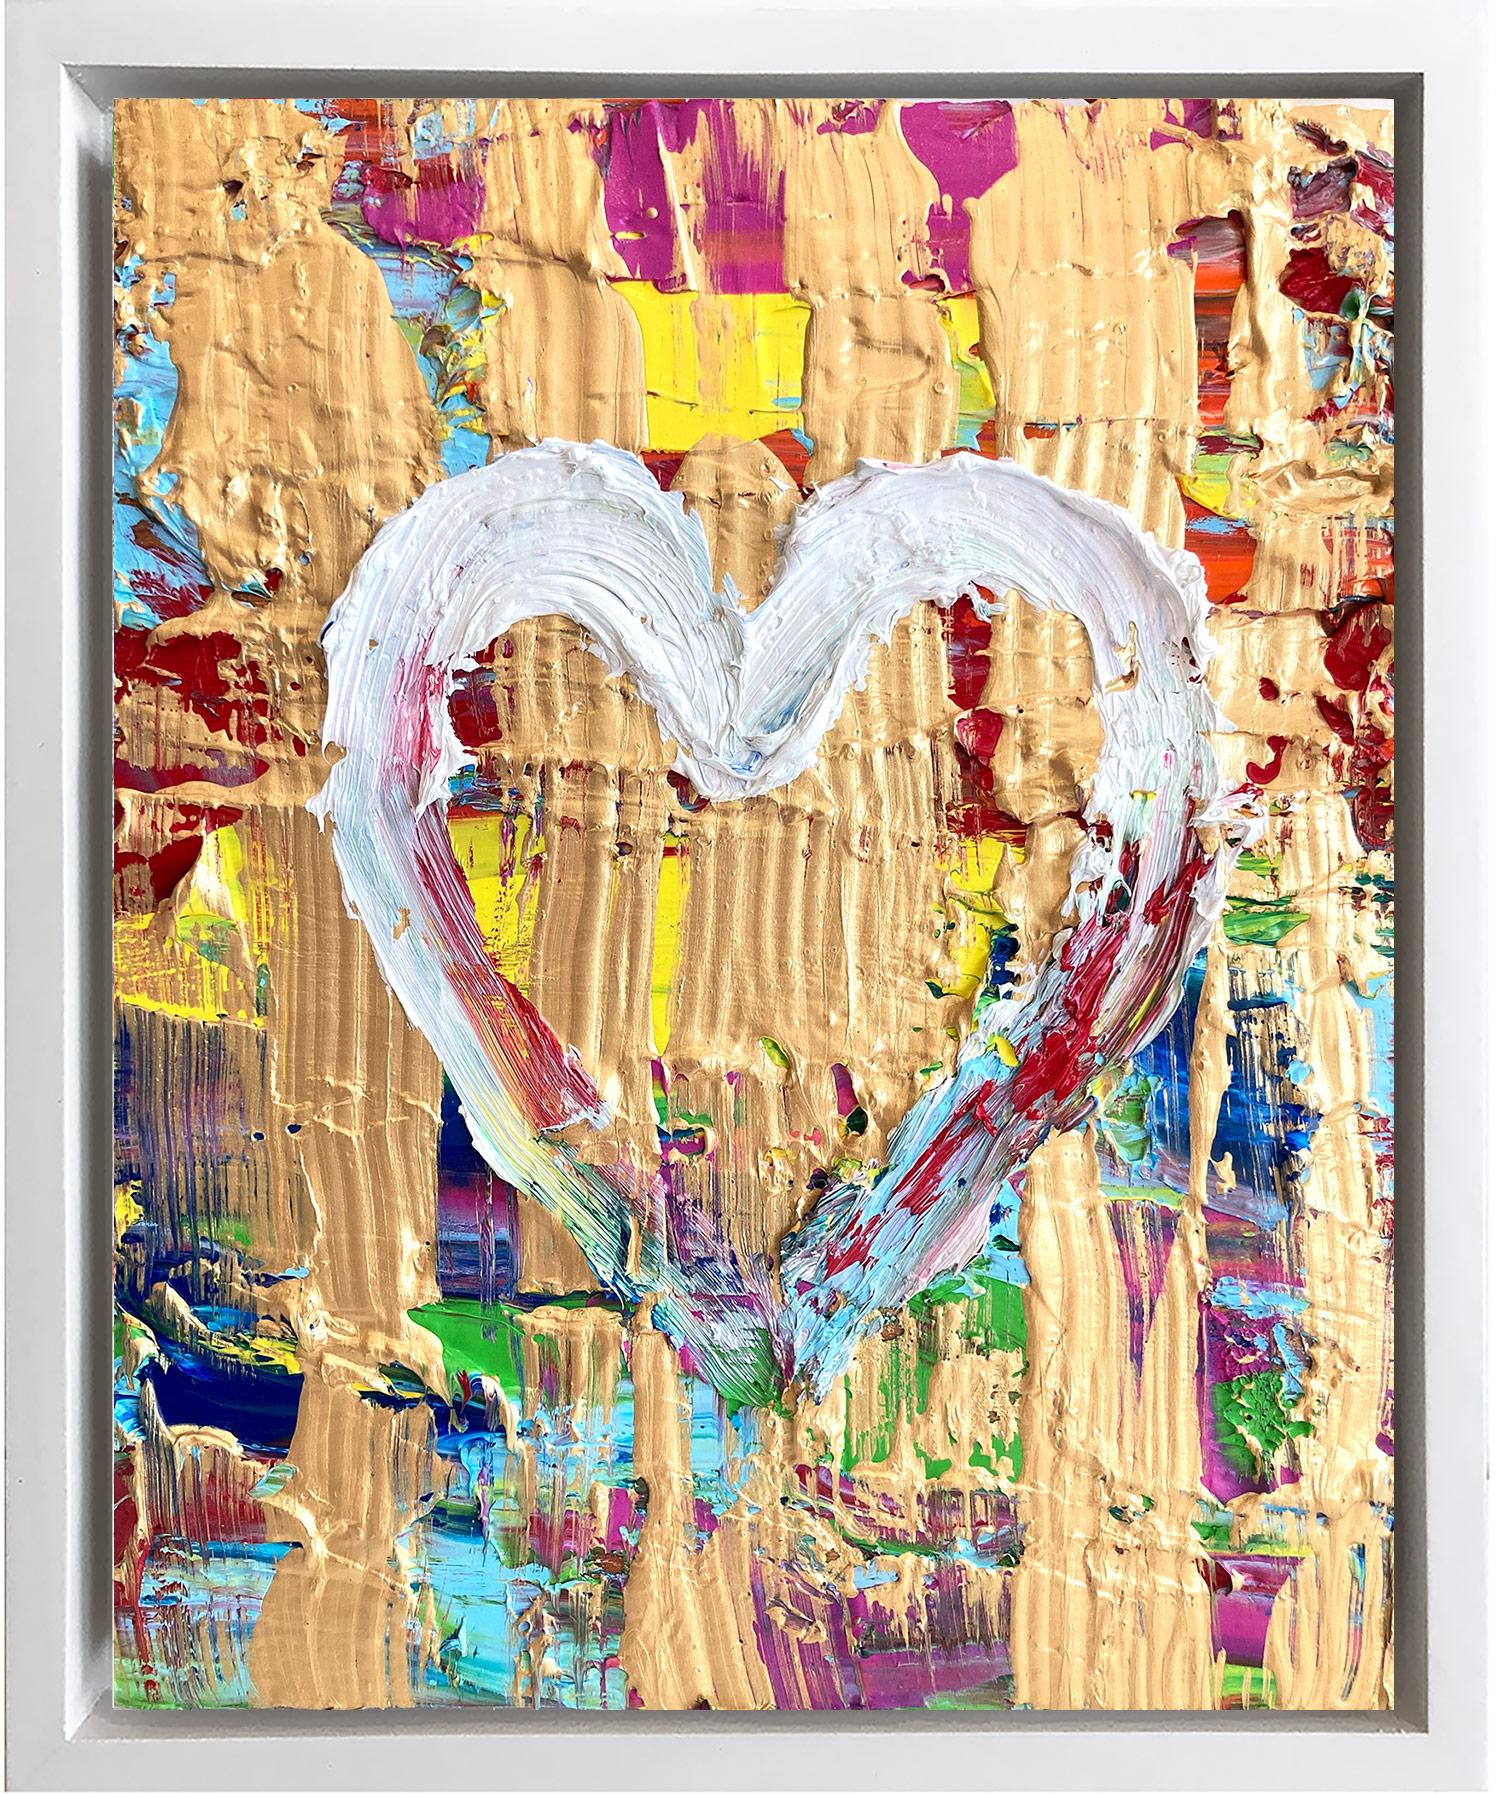 Cindy Shaoul Abstract Painting - "My Free Heart" Colorful Contemporary Pop Art Oil Painting Floater Frame